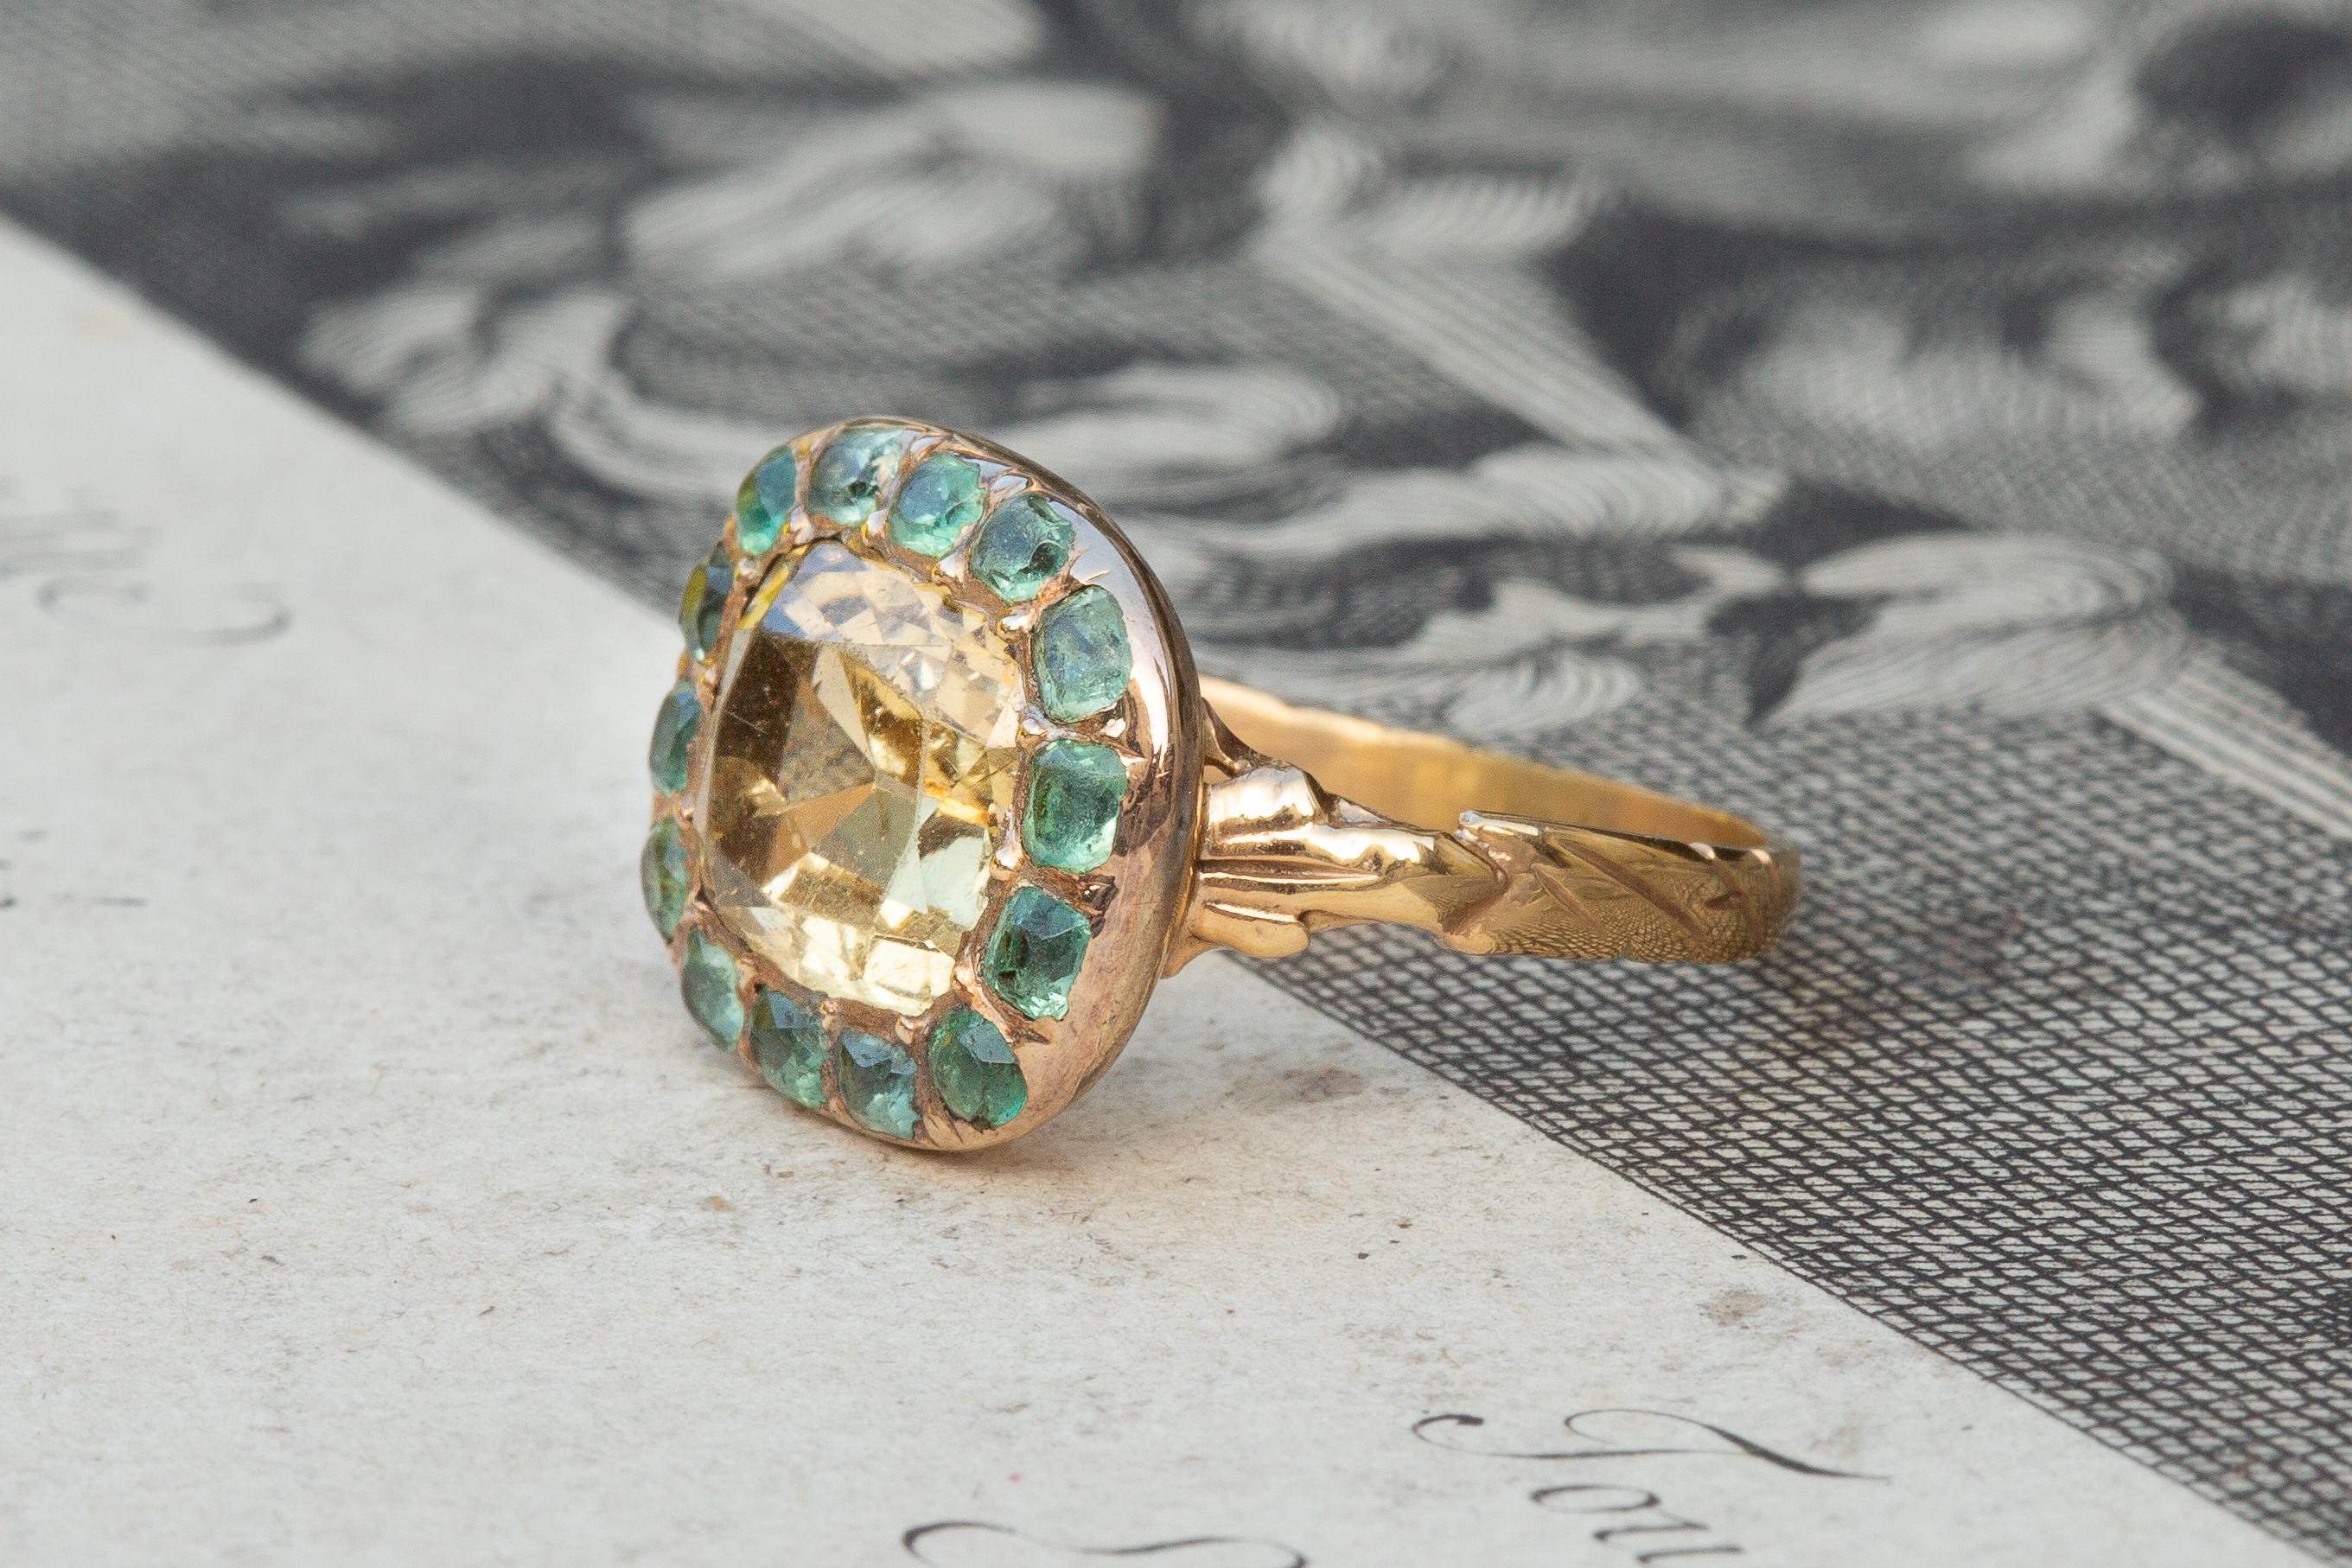 Antique Cushion Cut Rare French 18th Century Georgian Cluster Ring with Citrine and Emeralds